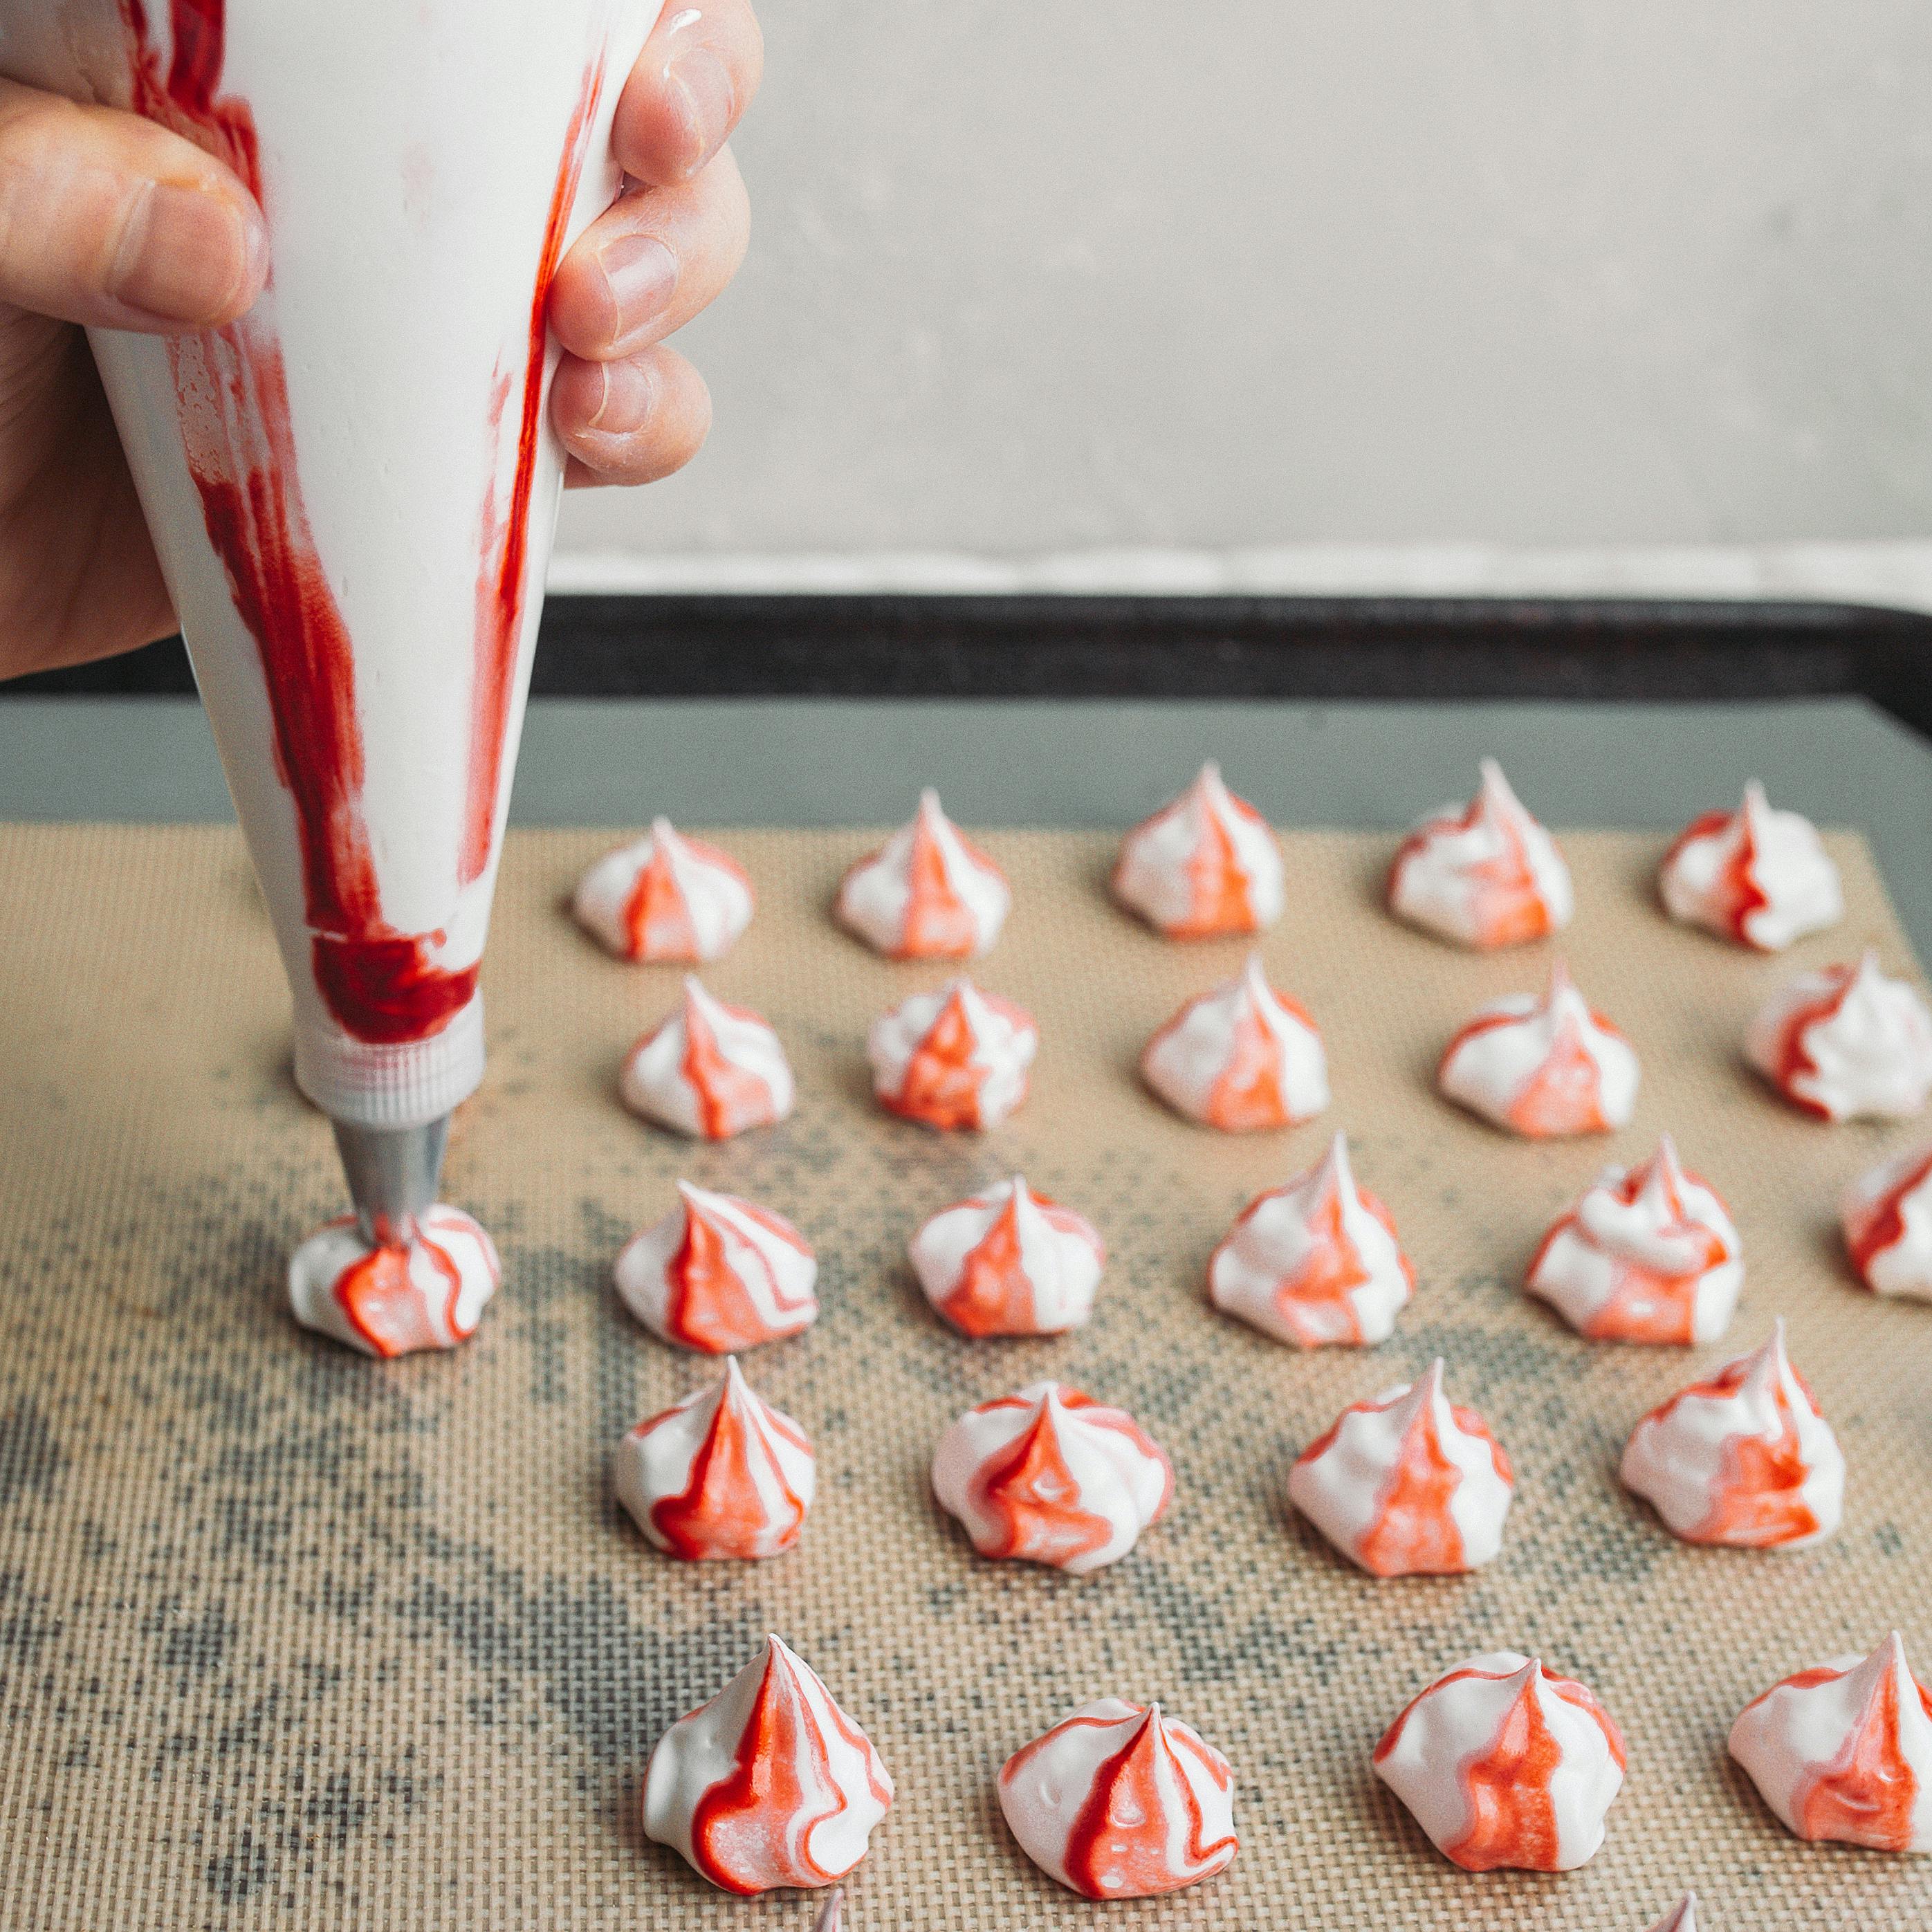 Woman holding piping bag making red and white weed-infused meringues.